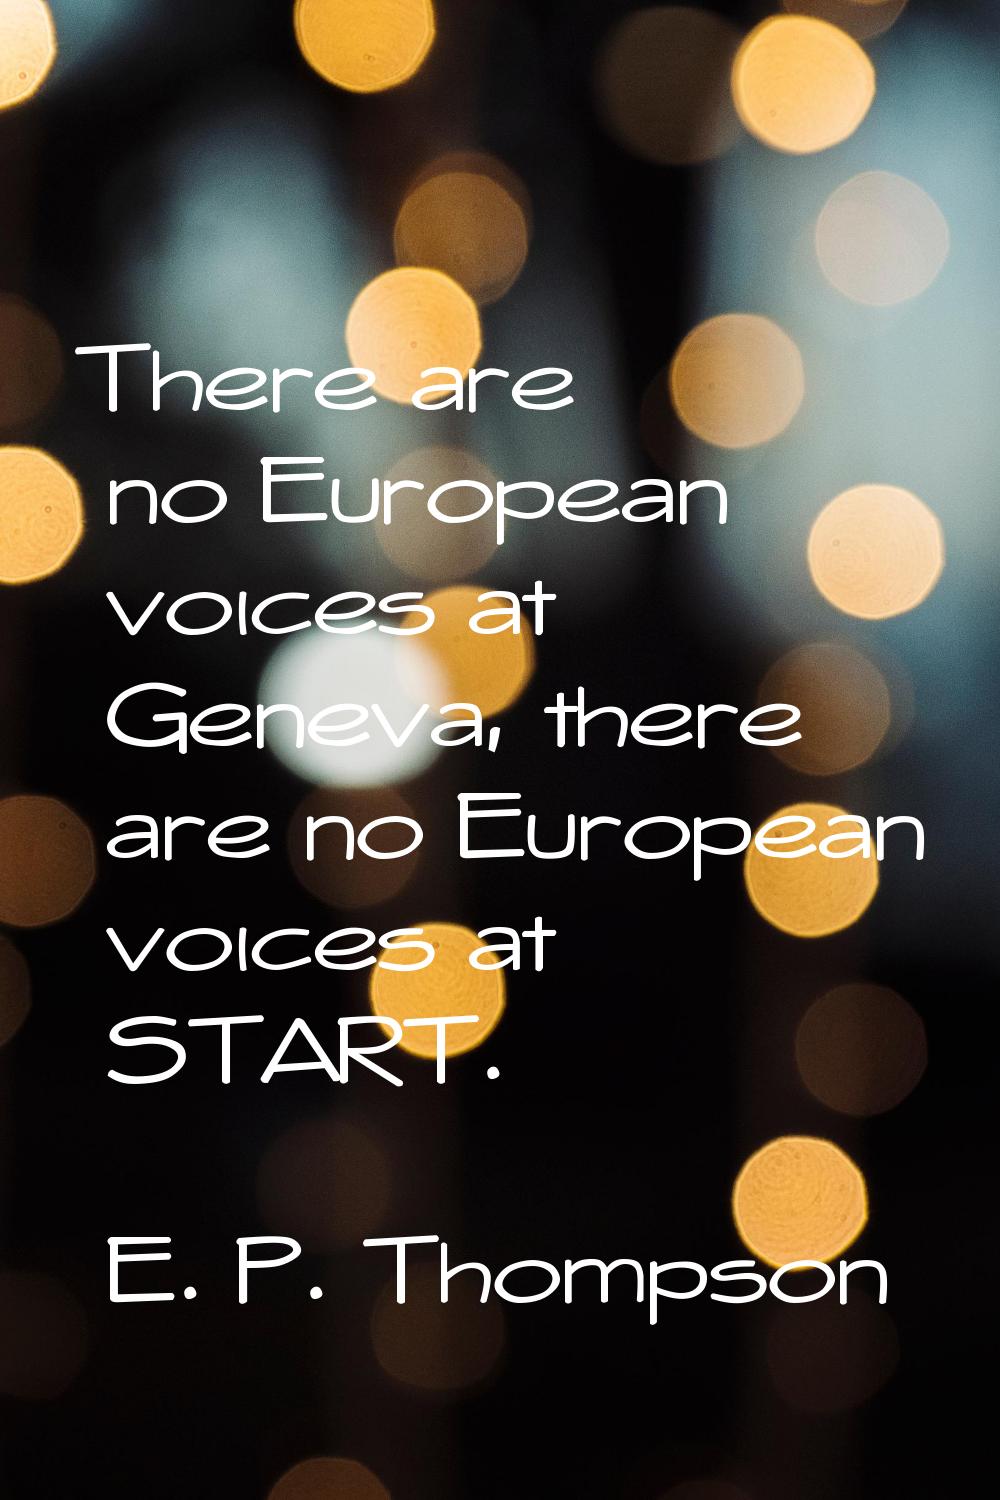 There are no European voices at Geneva, there are no European voices at START.